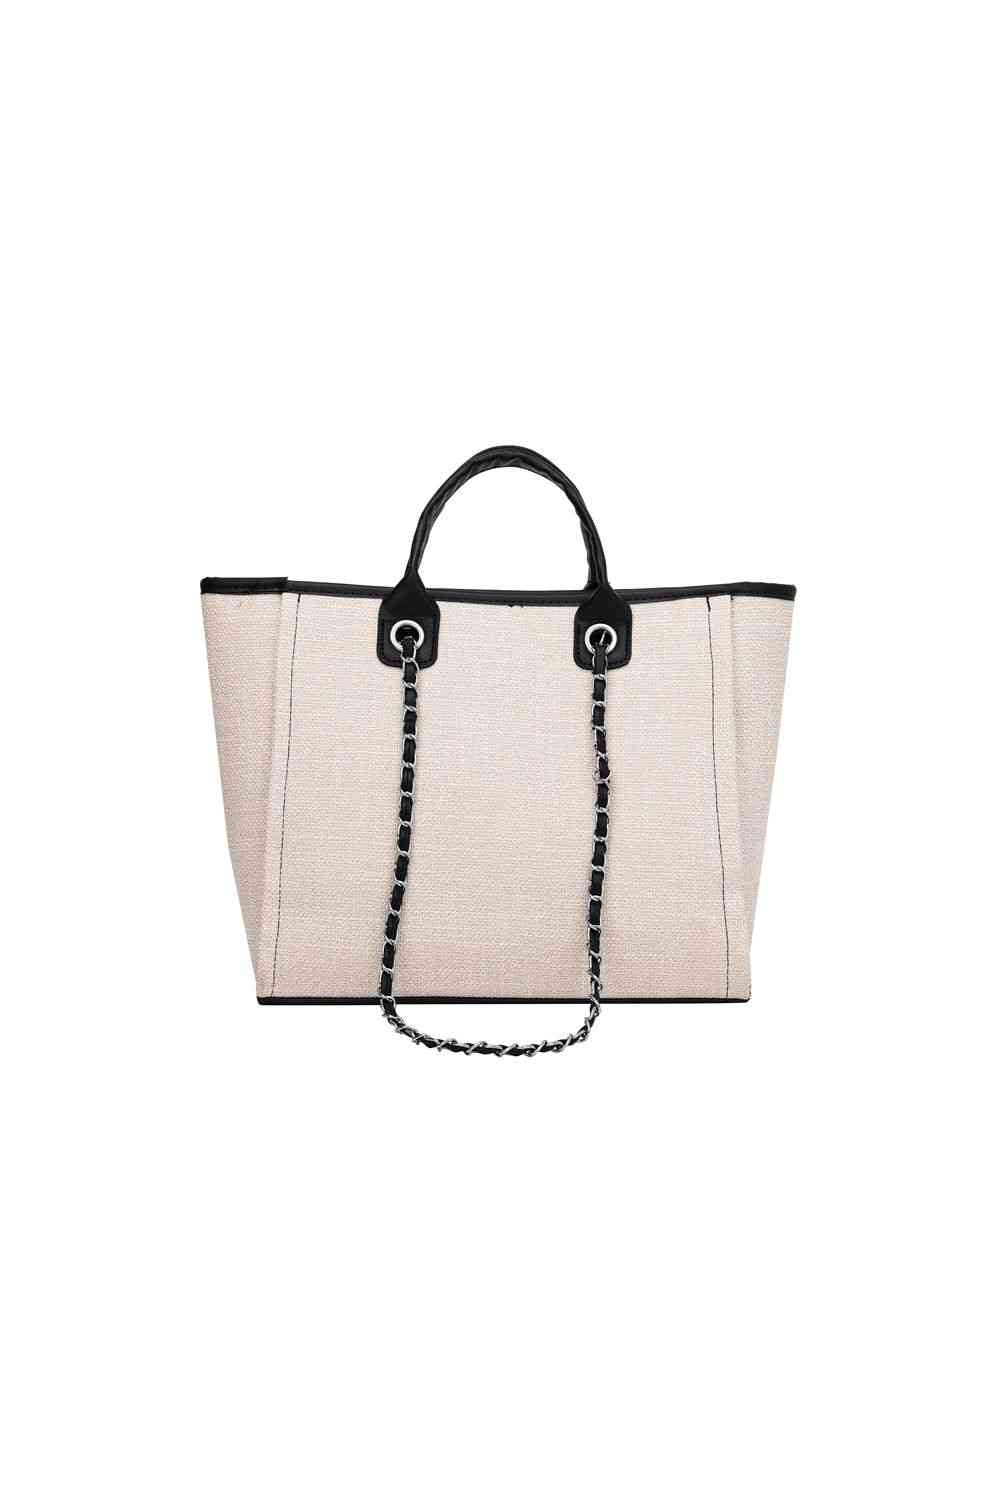 Adored Polyester Tote Bag Beige/Black One Size